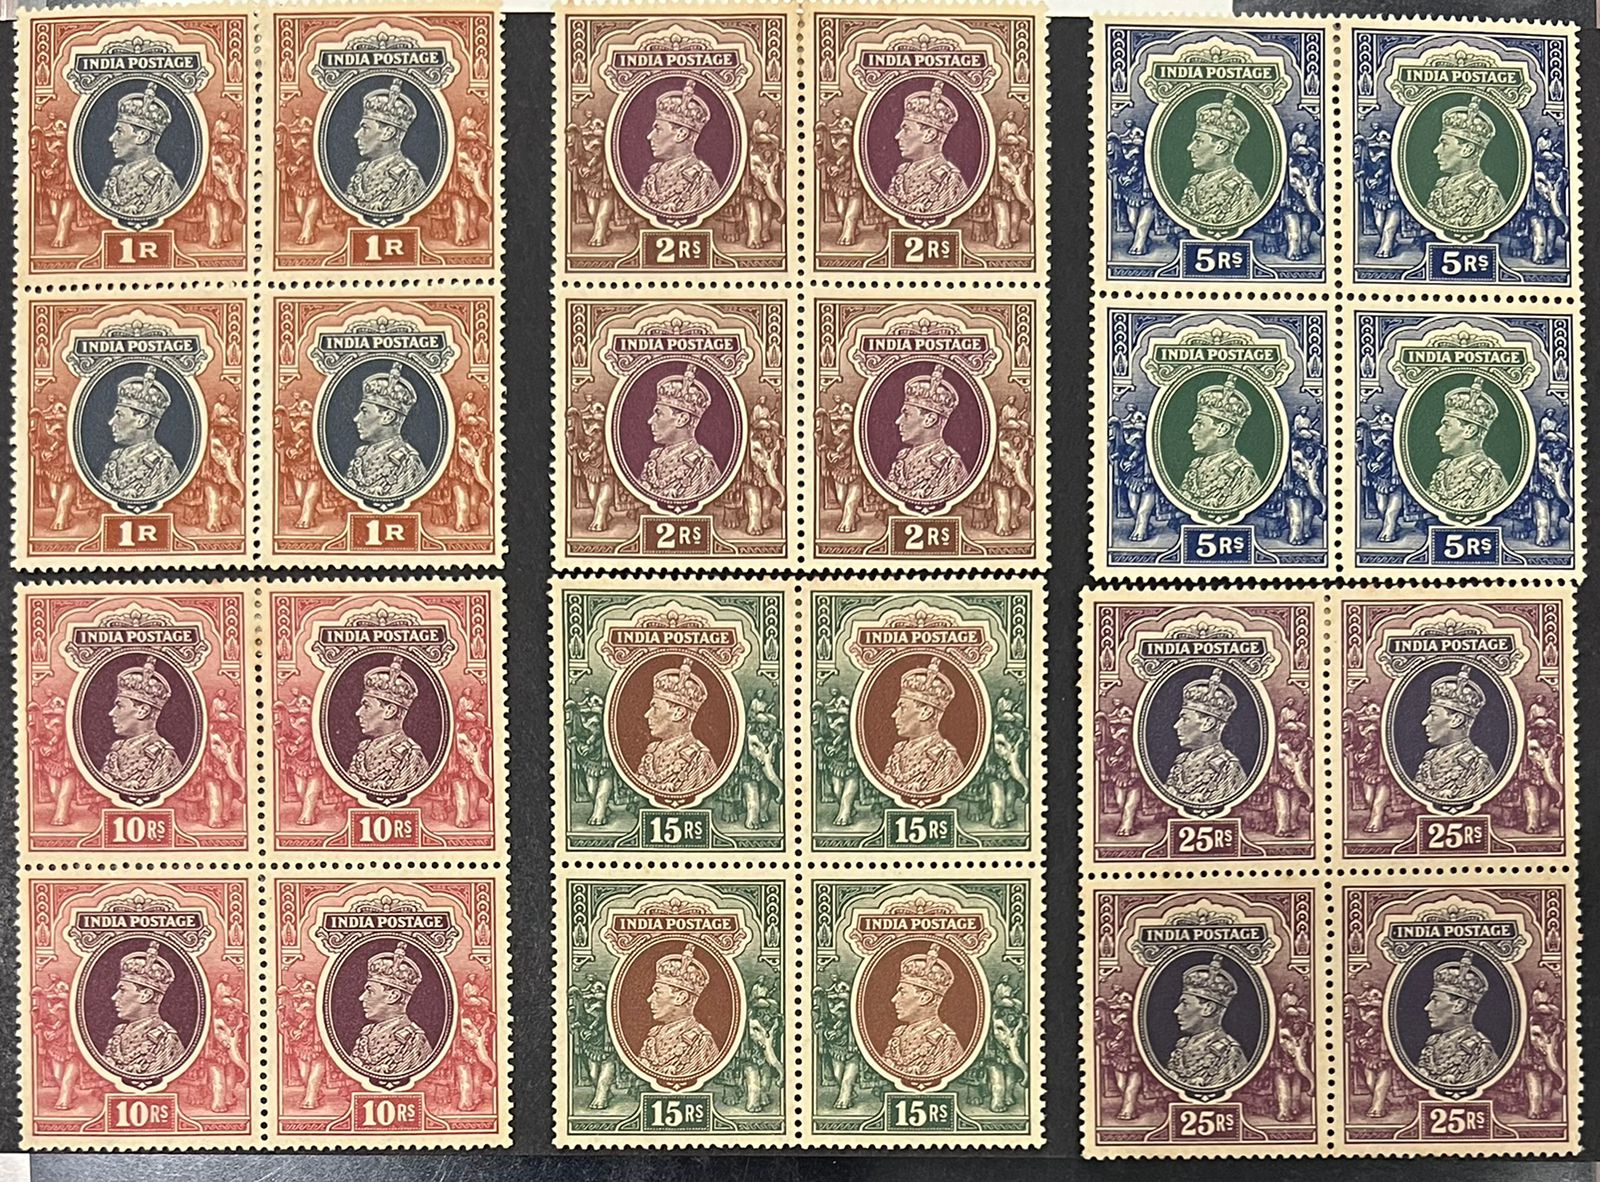 India 1937 KGVI High values SG 259-264 in Blocks of 4 Mint Rare SG Cat Val £2440 for singles